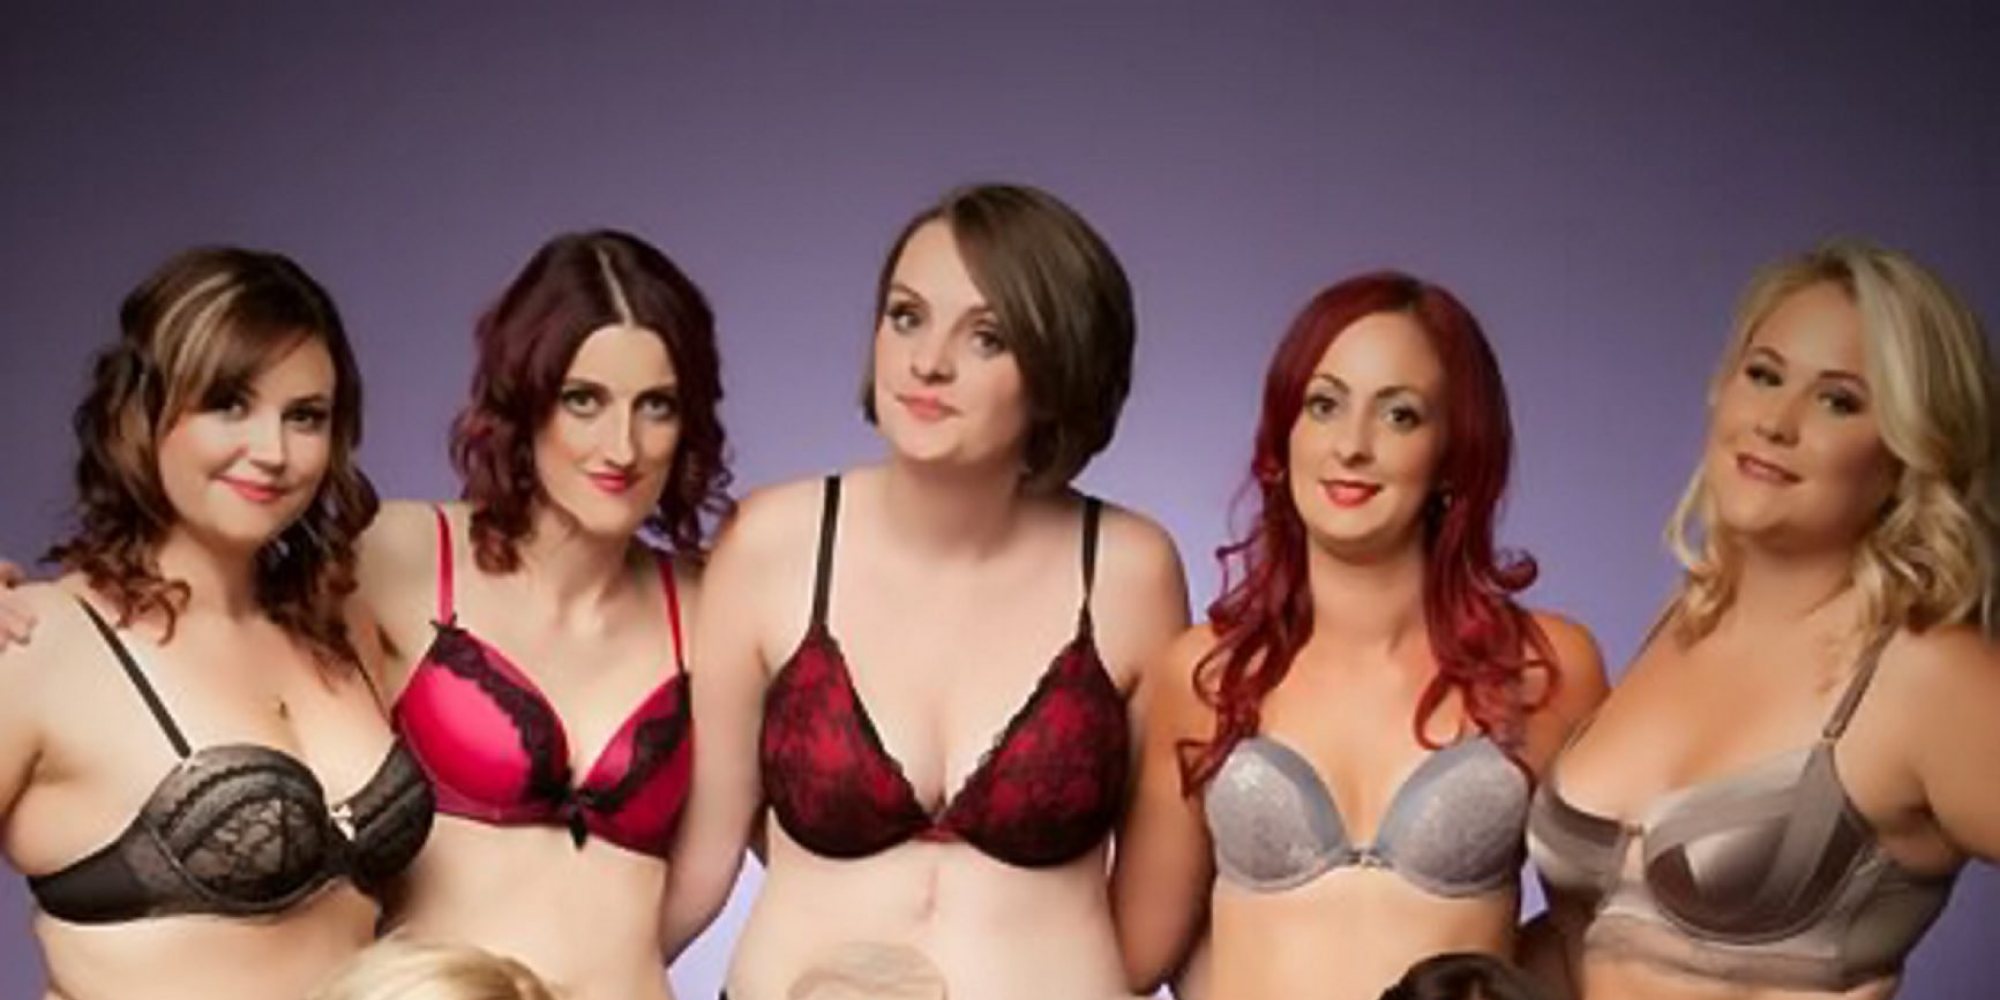 HOT PICS: Posh girls pose in bras and knickes for saucy 